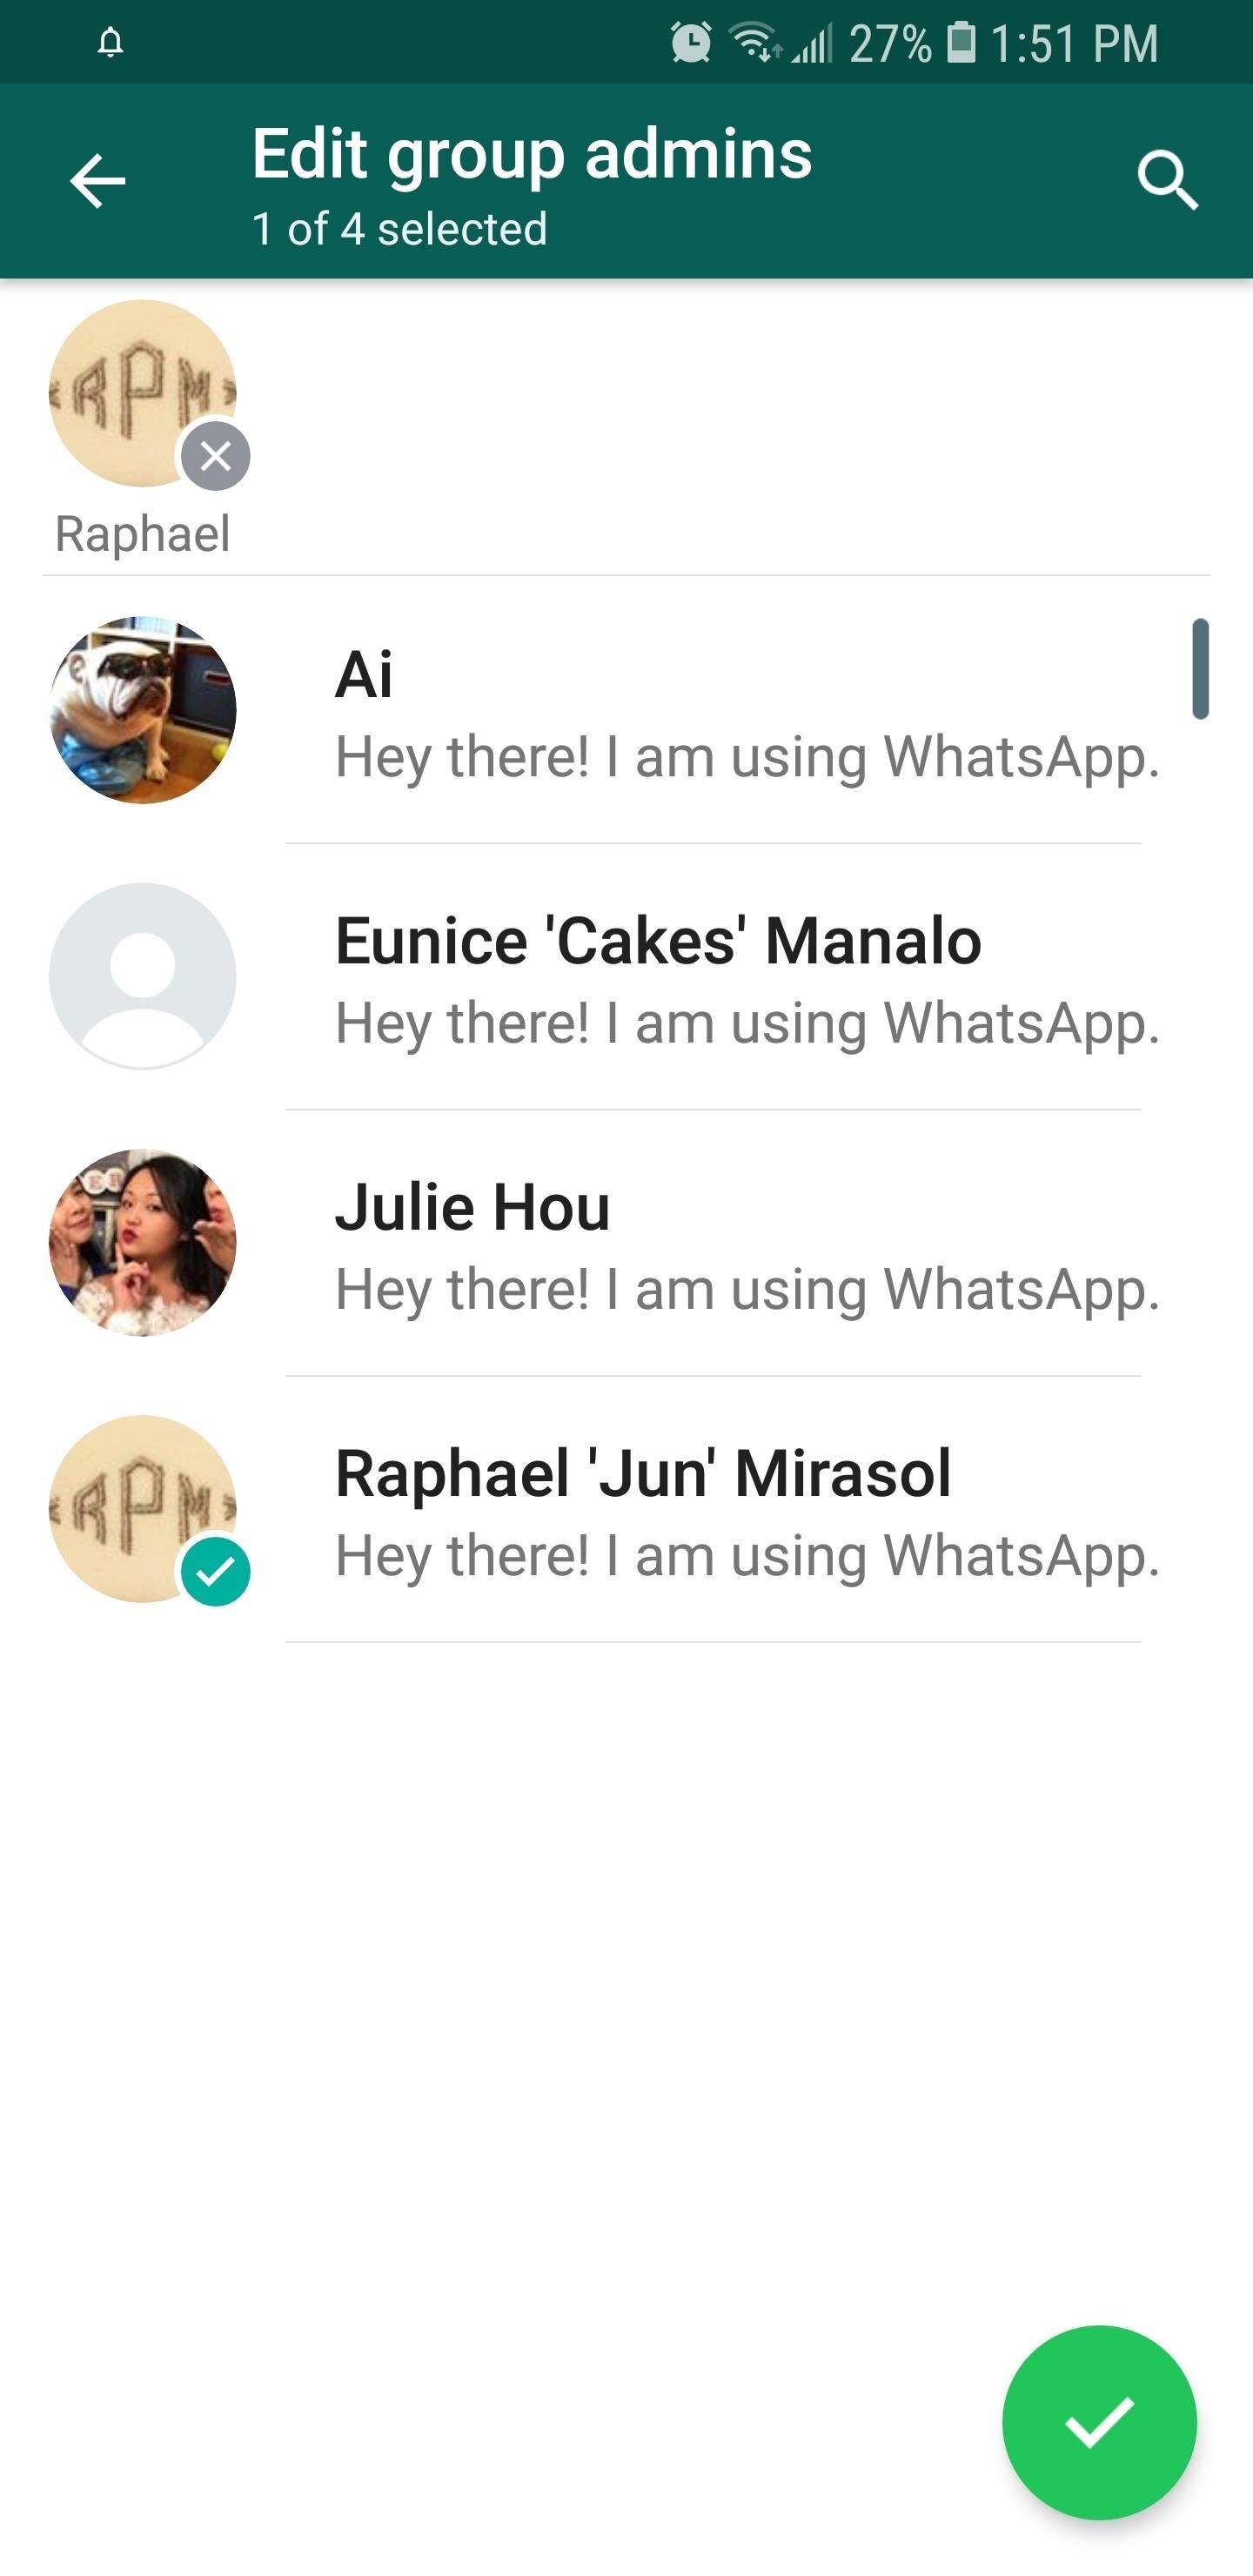 How to Add Descriptions to WhatsApp Group Chats to Coordinate Discussions Better